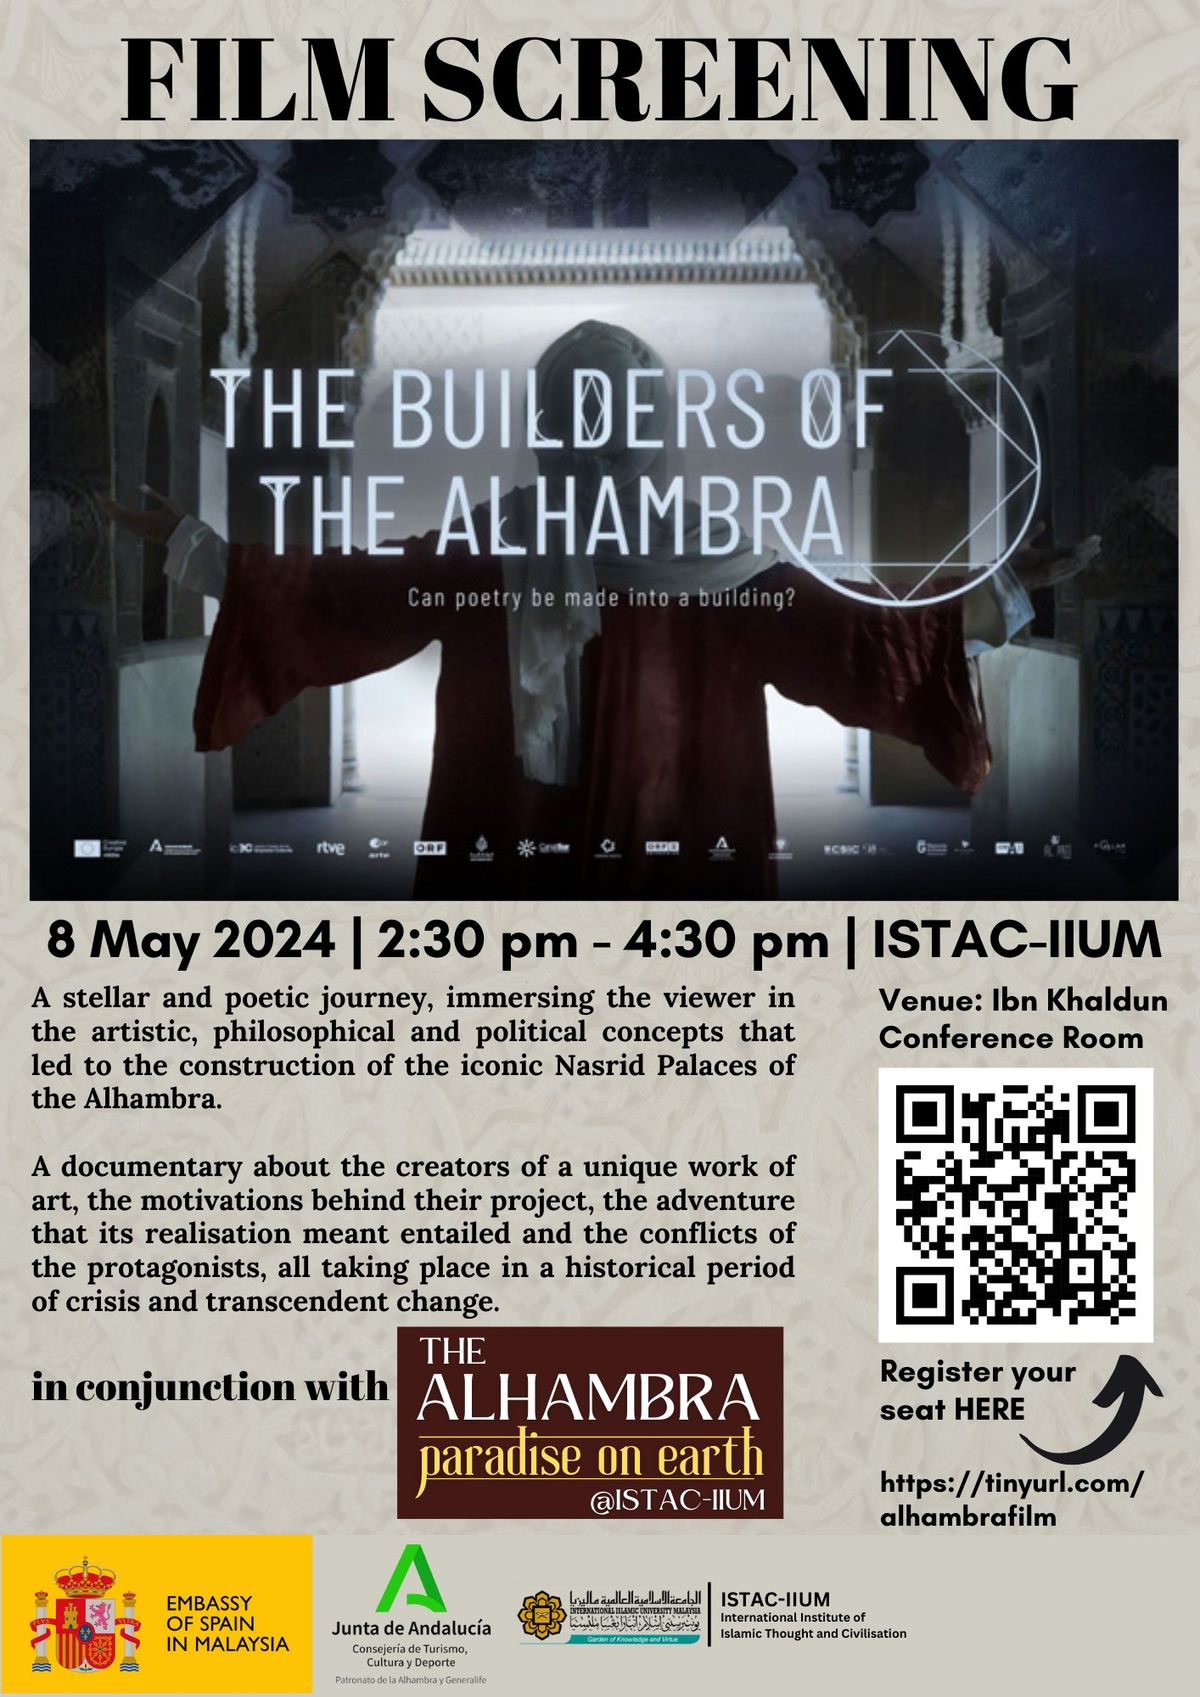 THE BUILDERS OF THE ALHAMBRA FILM SCREENING